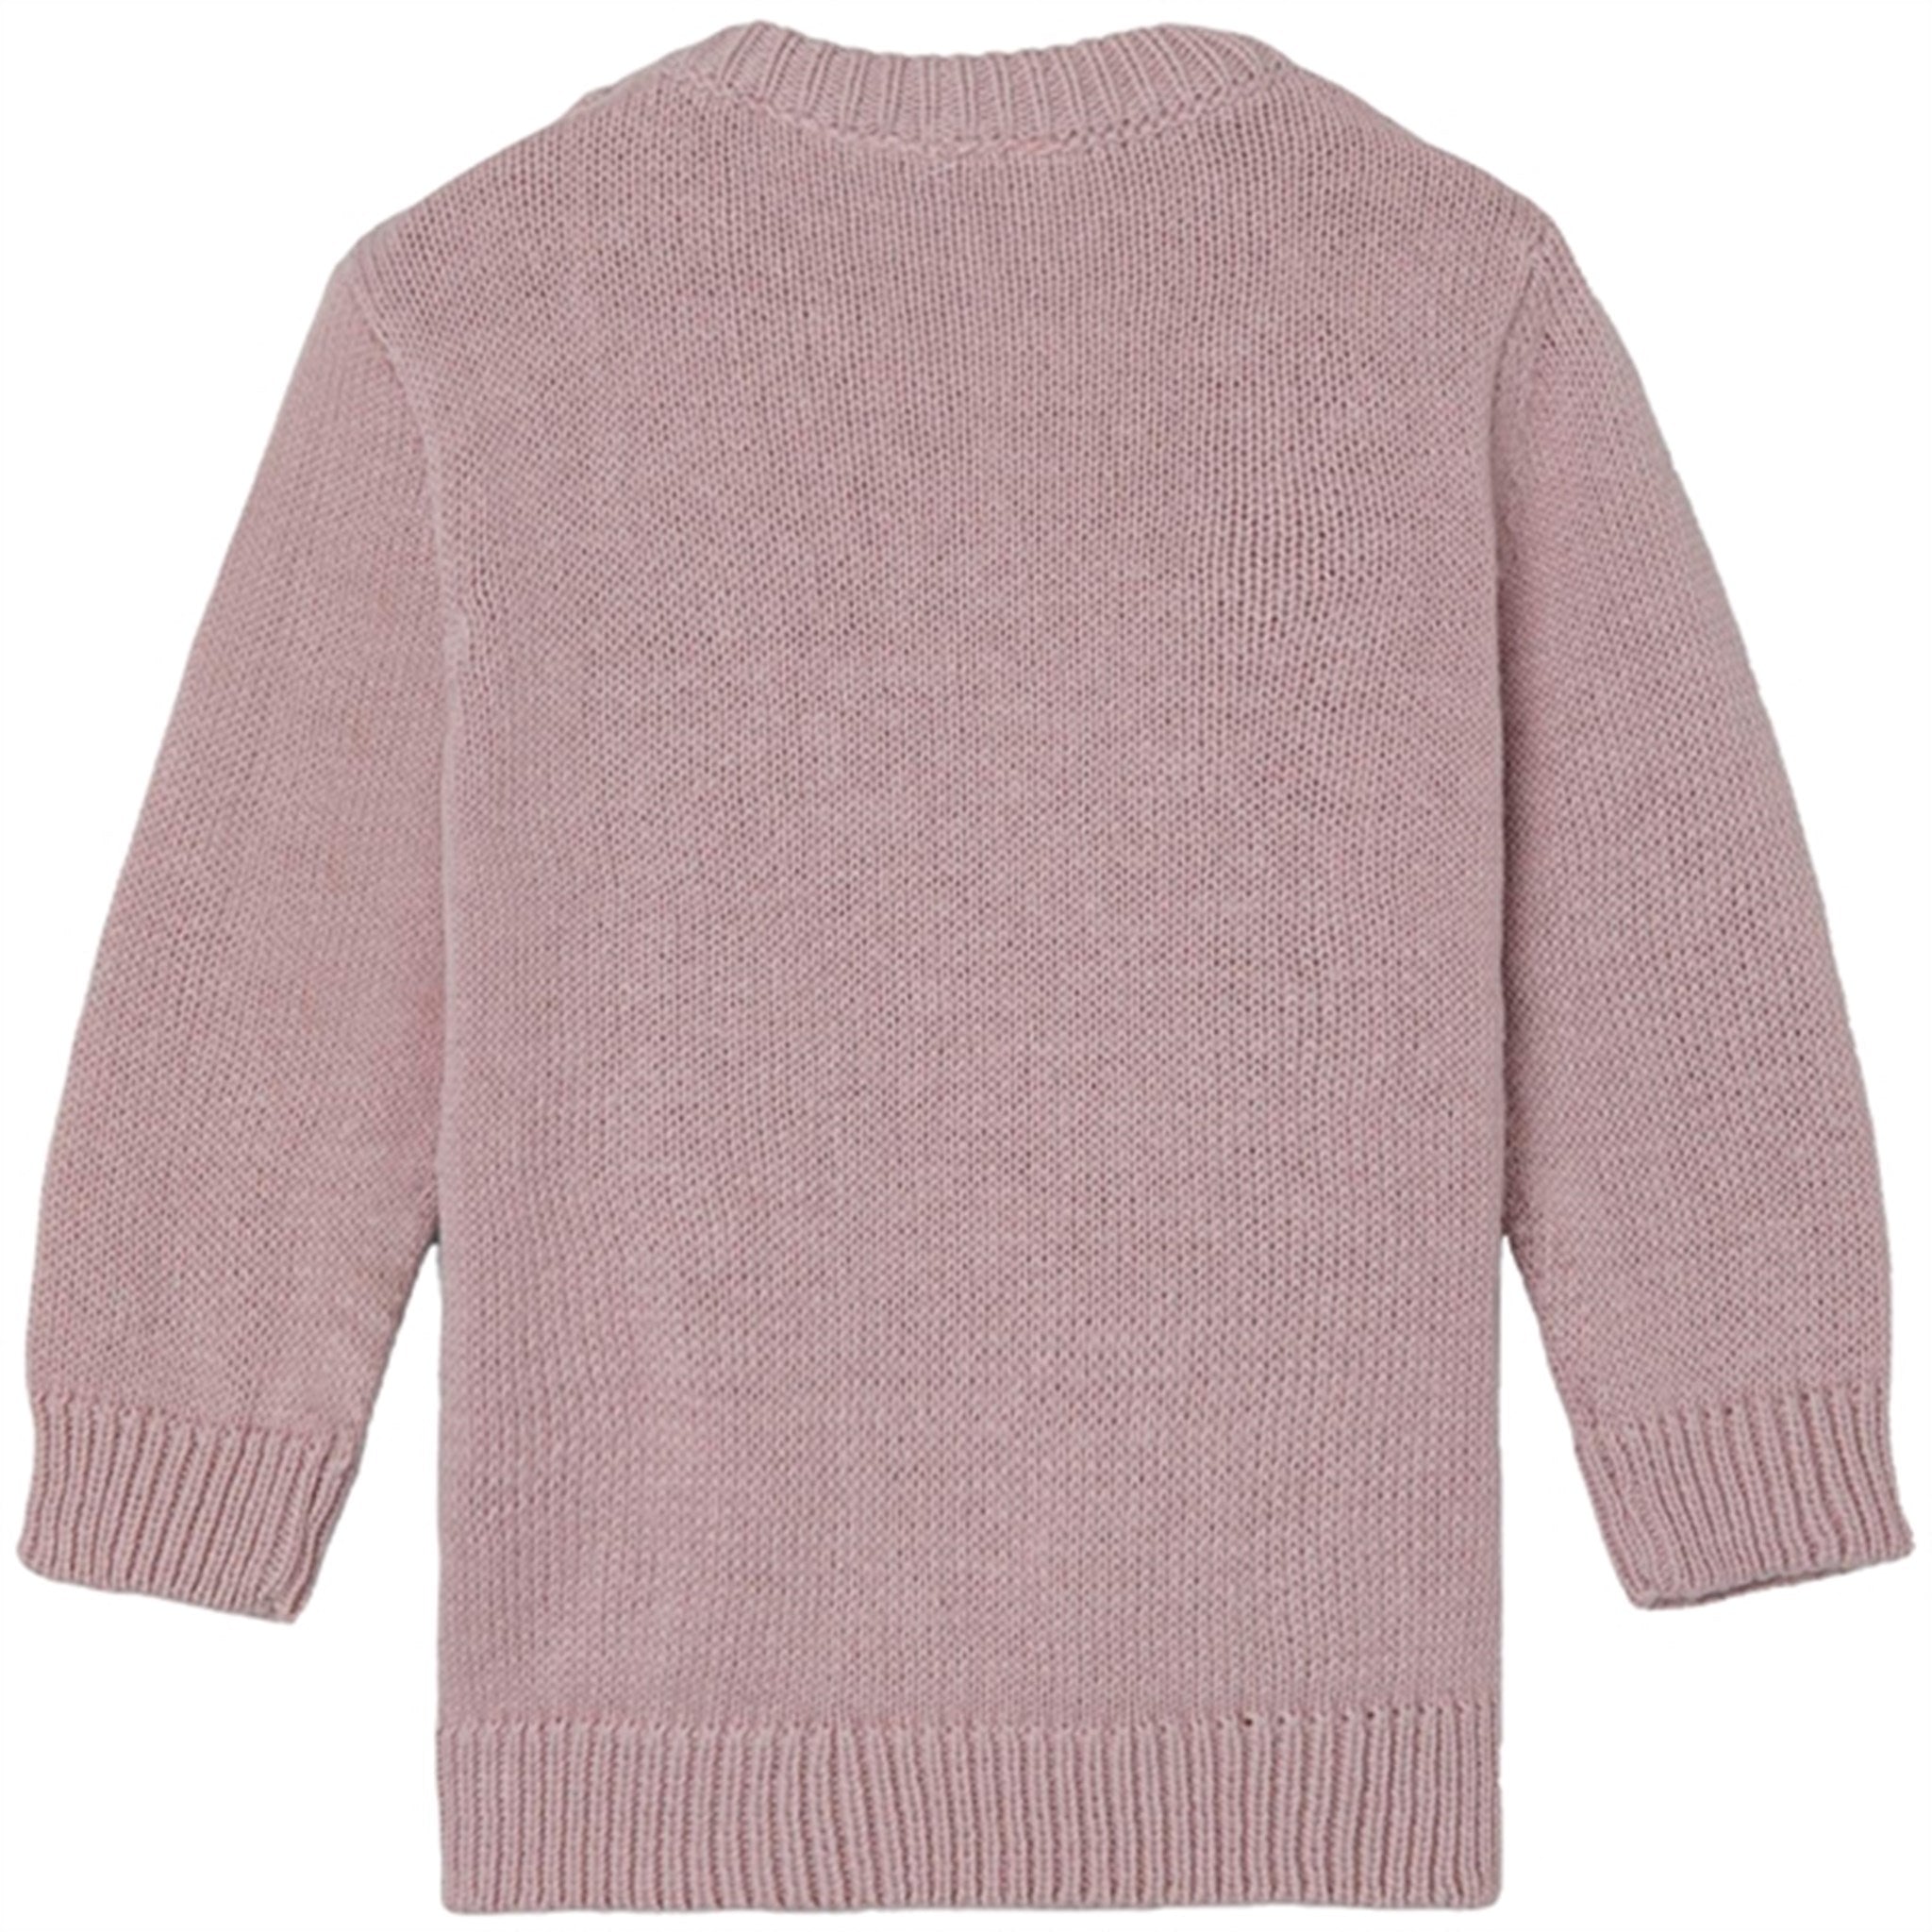 Name it Violet Ice Lifine Knit Sweater 2